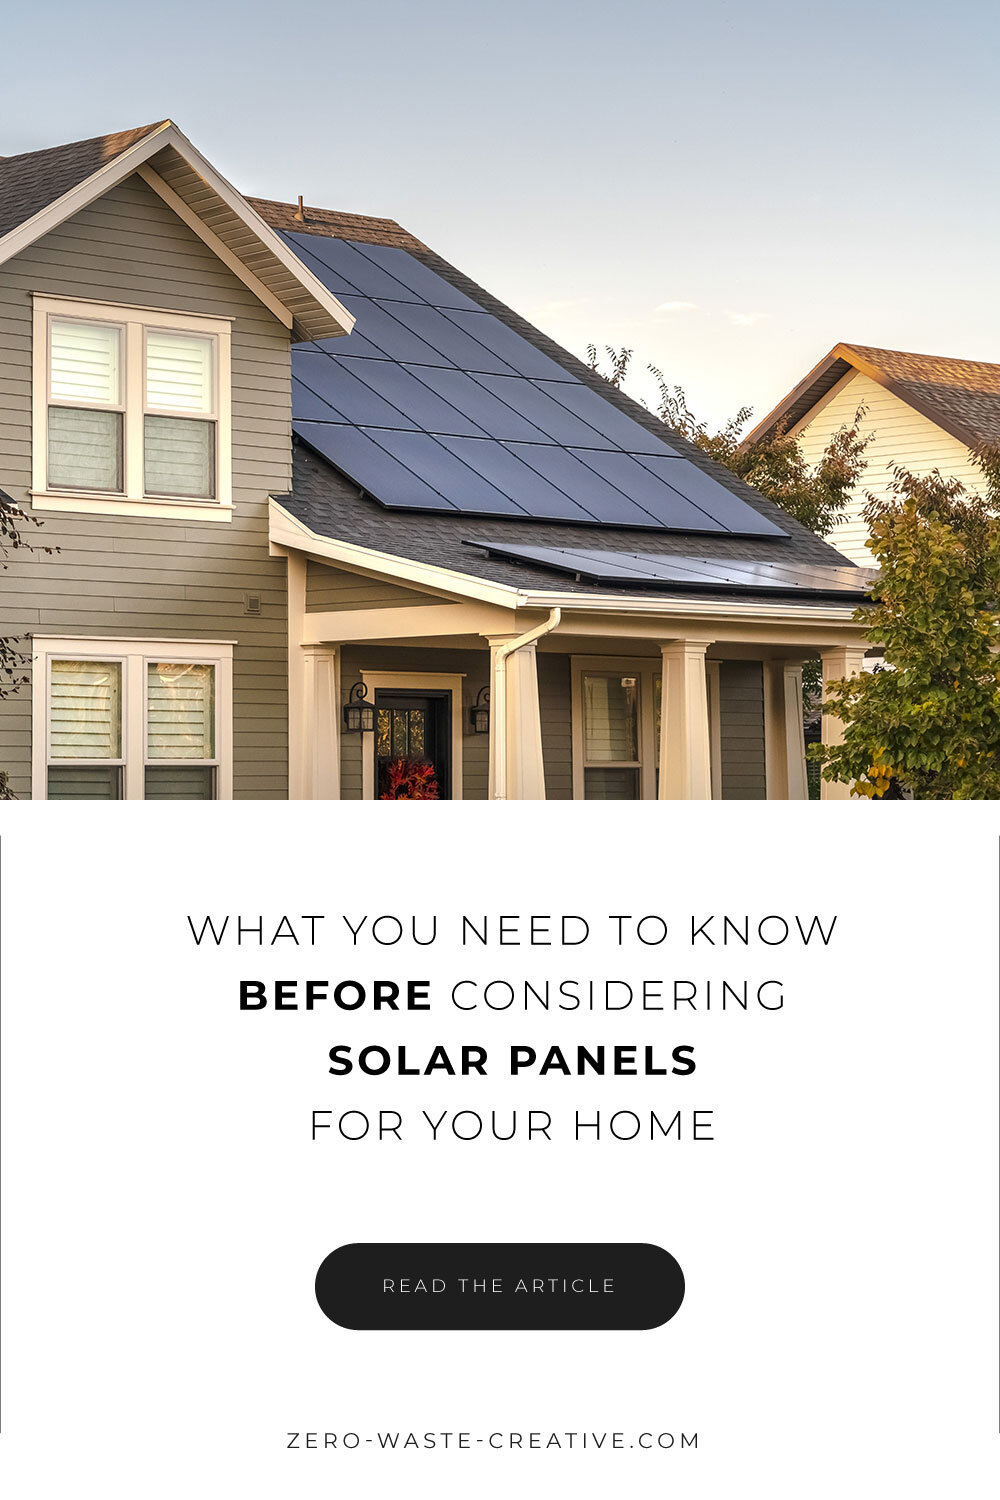 What-you-Need-to-Know-Before-Considering-Solar-Panels-for-your-Home.jpg